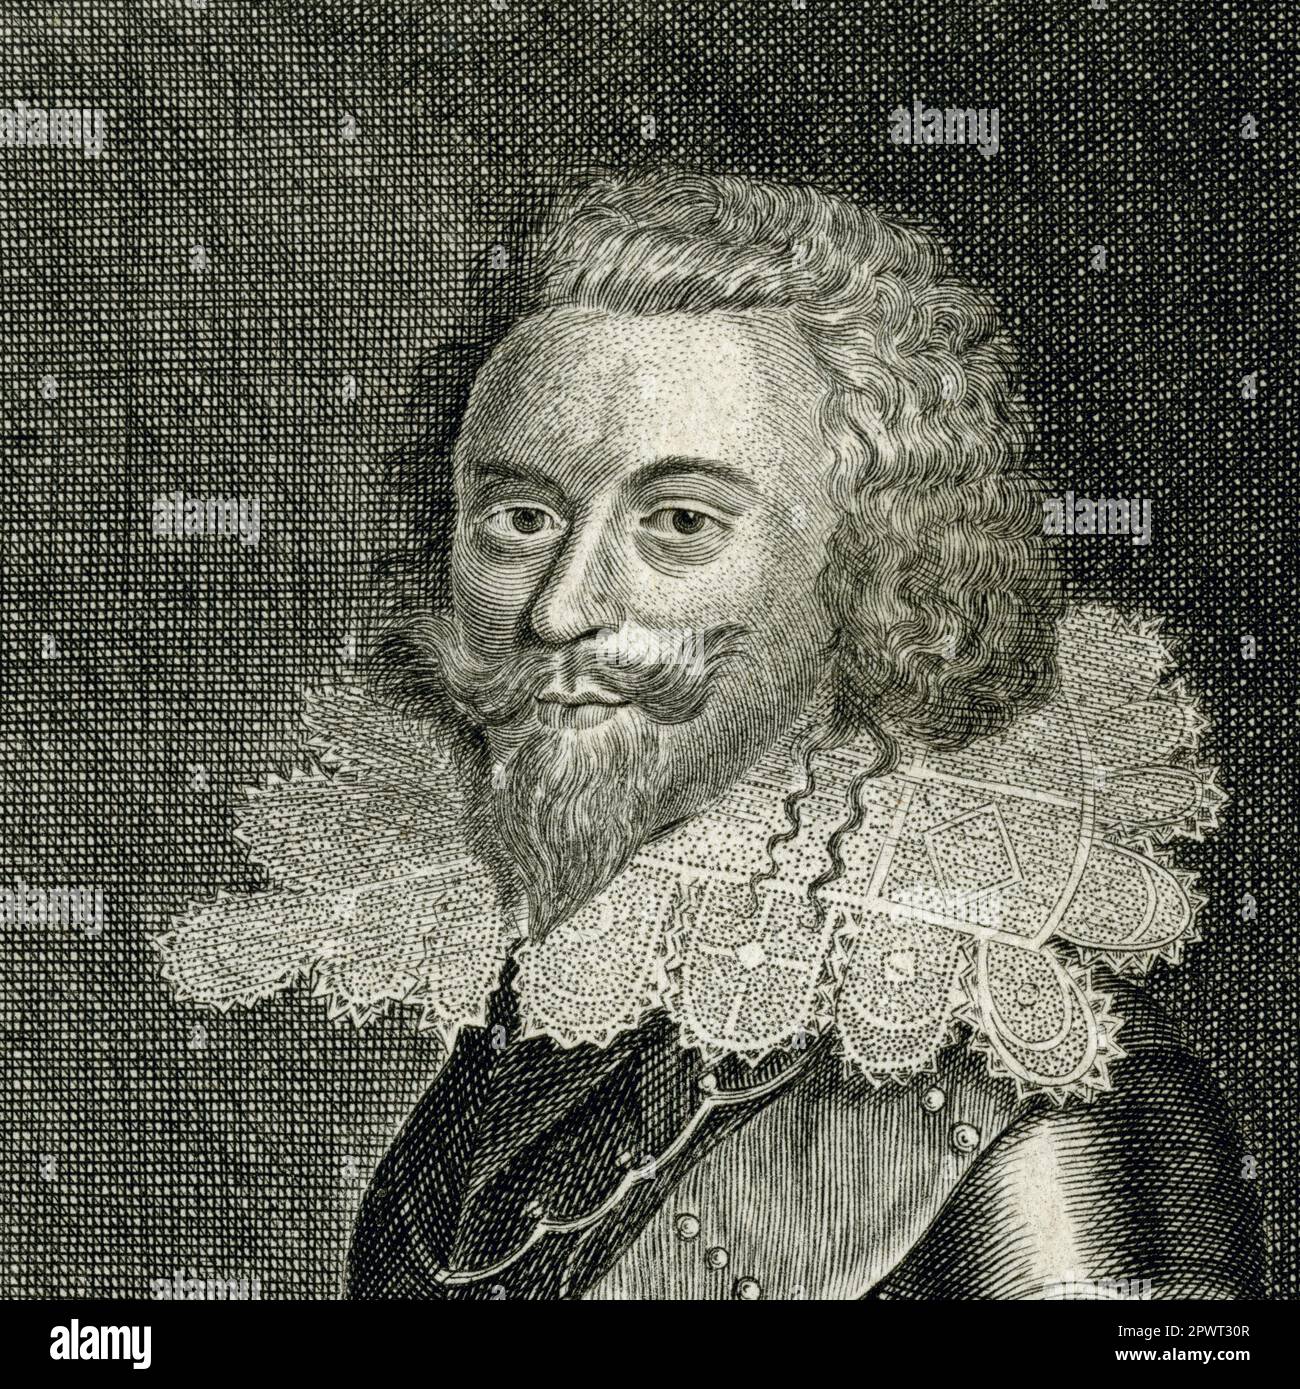 George Villiers, 1st Duke of Buckingham (1592-1628), said to be 'the most handsomest-bodied man in all of England', a favourite of both King James I of England and VI of Scotland and of his son, King Charles I. Square detail of engraving created in the 1700s after a portrait painted by Cornelius Johnson (1593-1661). Stock Photo